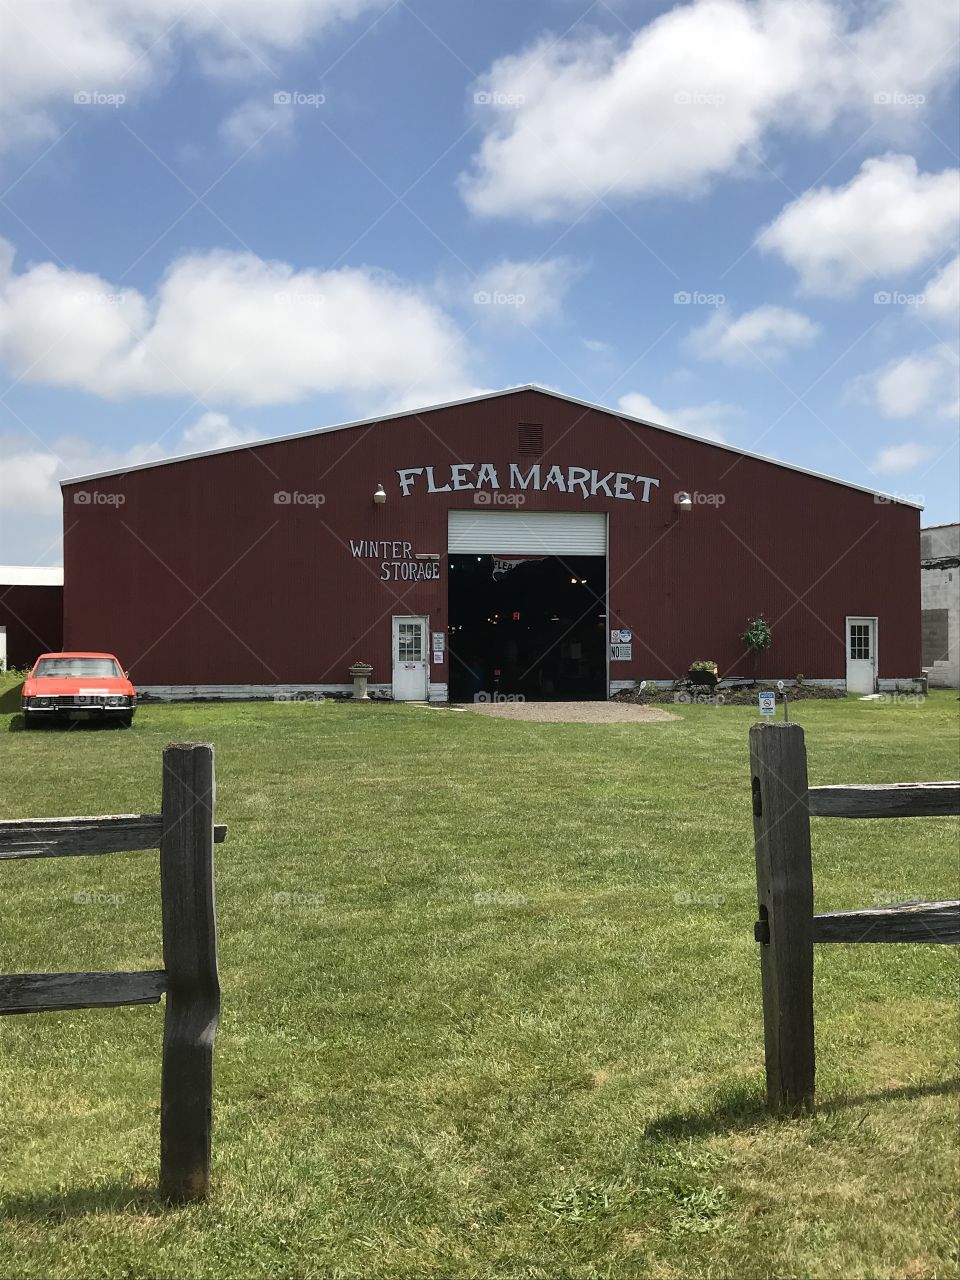 The month of June is a great time for treasure hunting. Some of the best treasures found are those at summertime flea markets. 